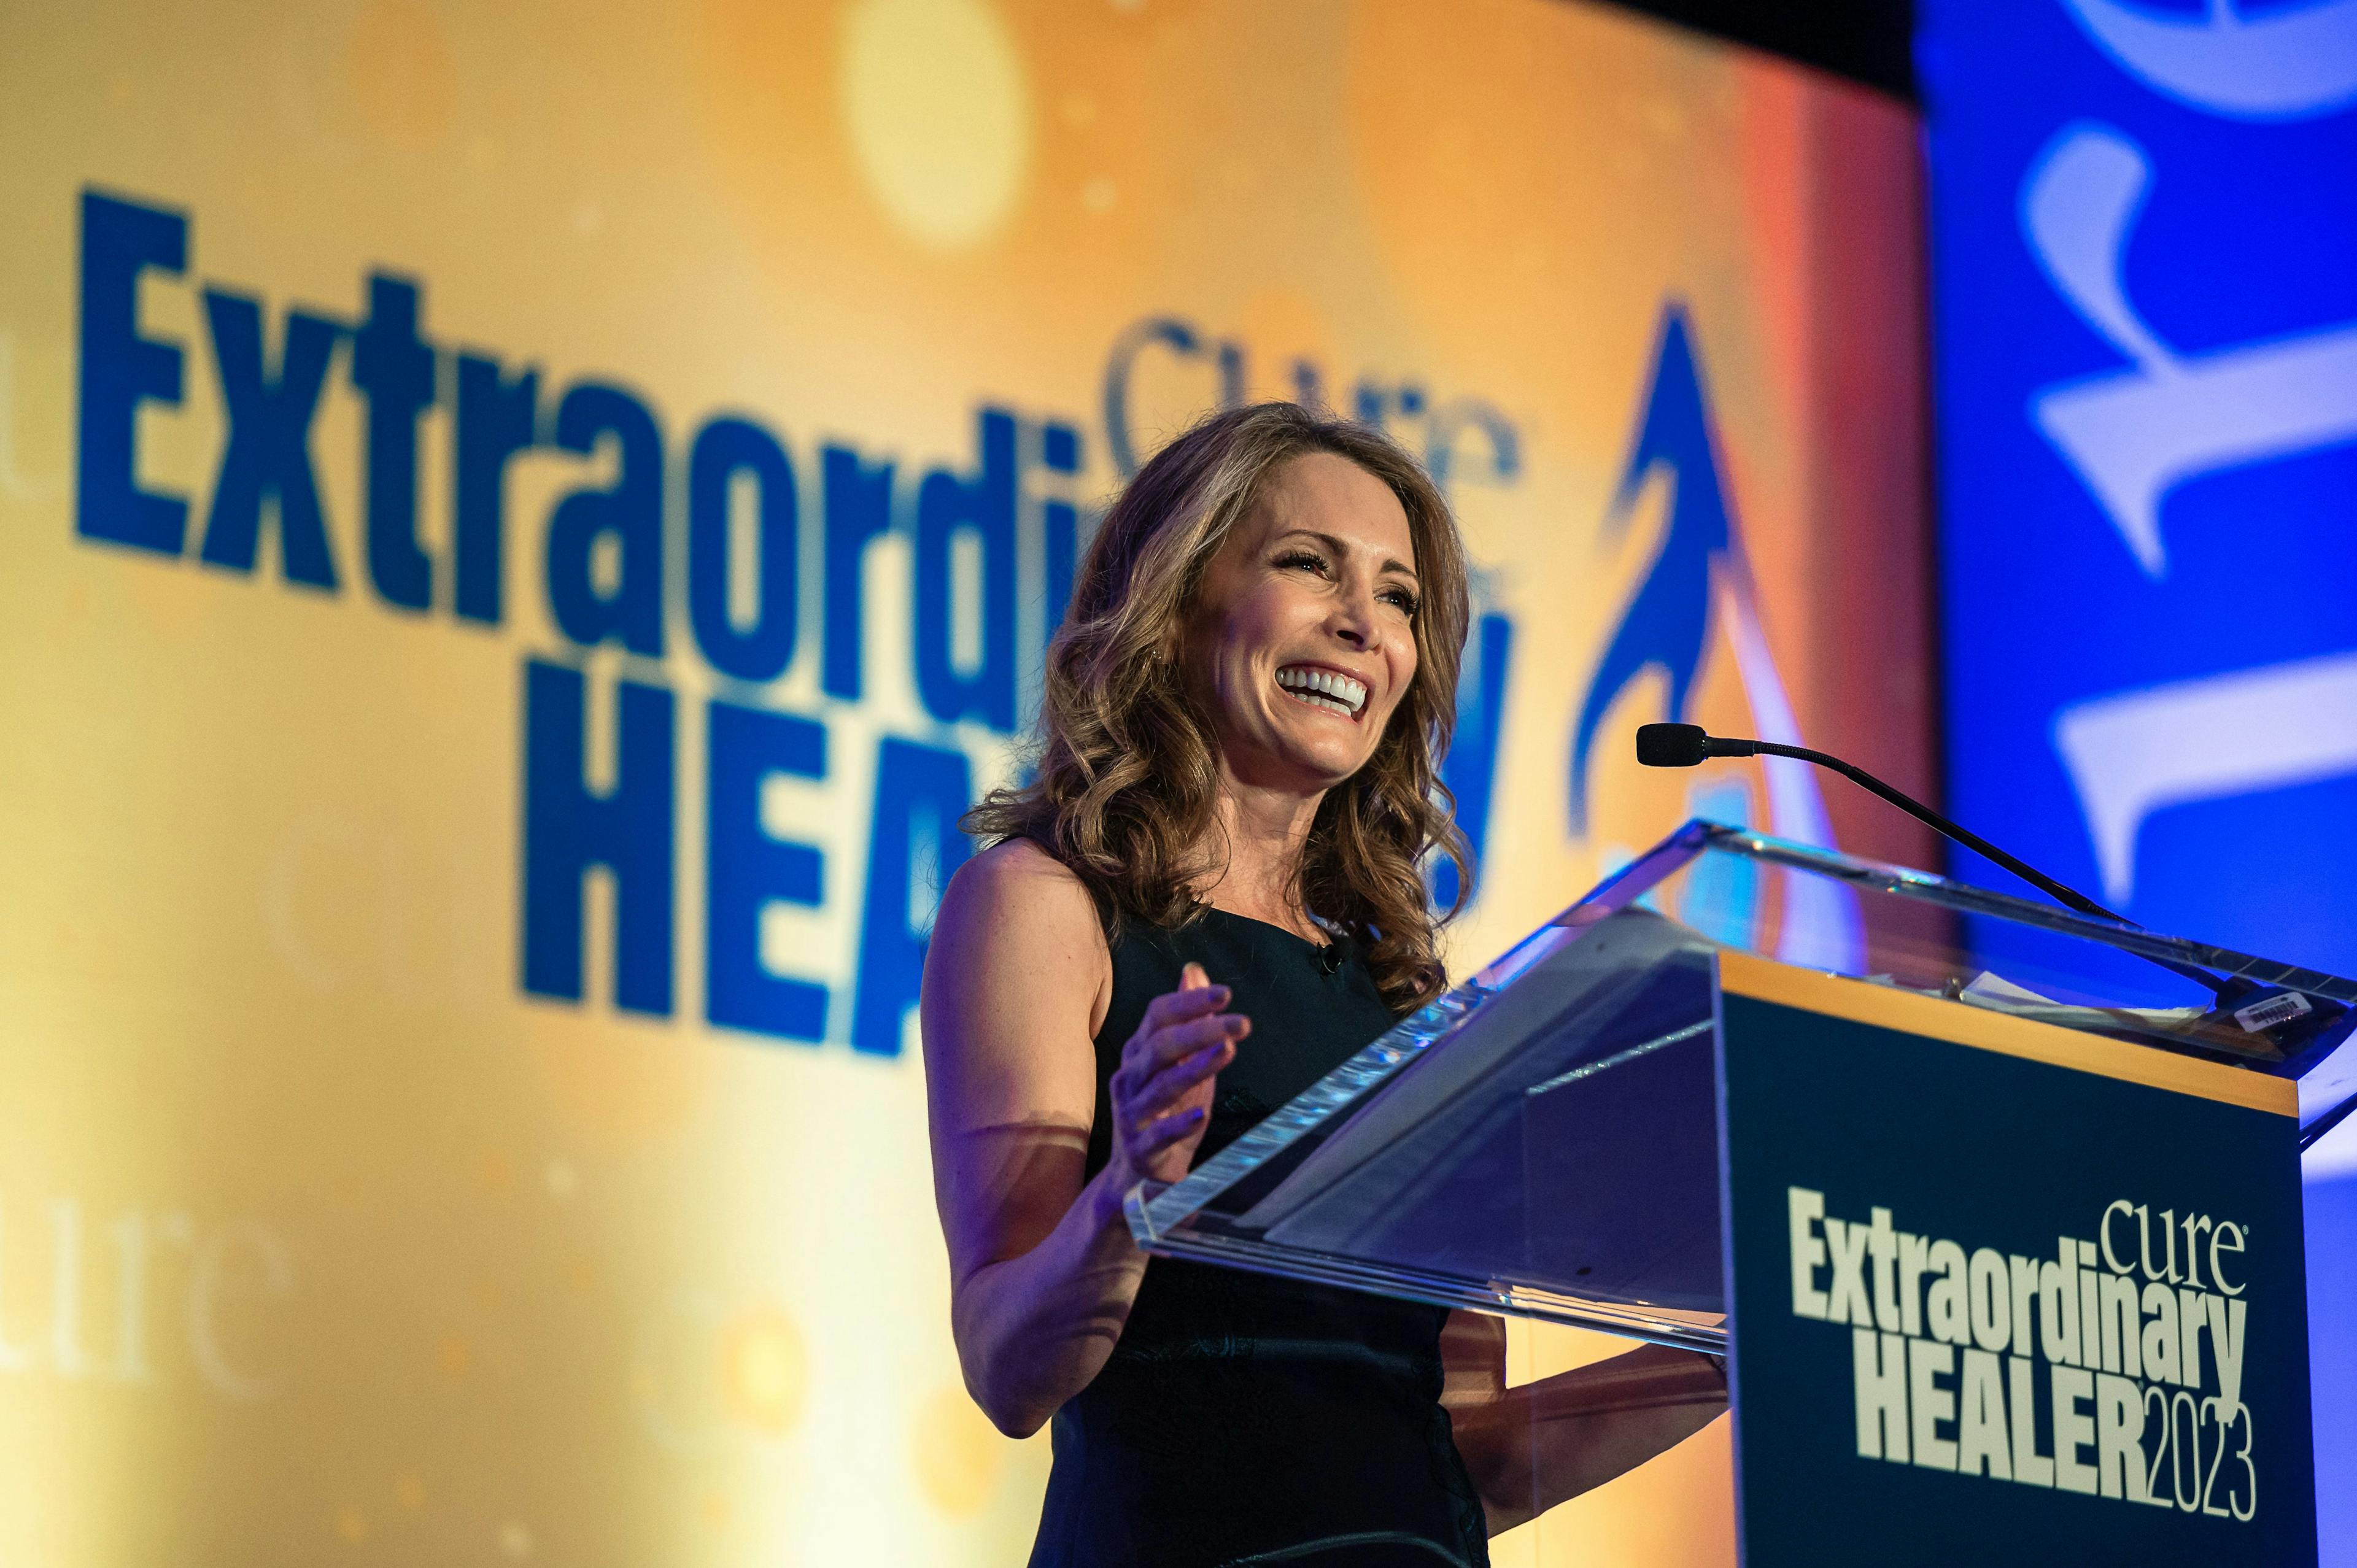 Shannon Miller smiling at a podium while delivering the keynote address at the 2023 Extraordinary Healer event | Image credit: © ATA-GIRL PHOTOGRAPHY